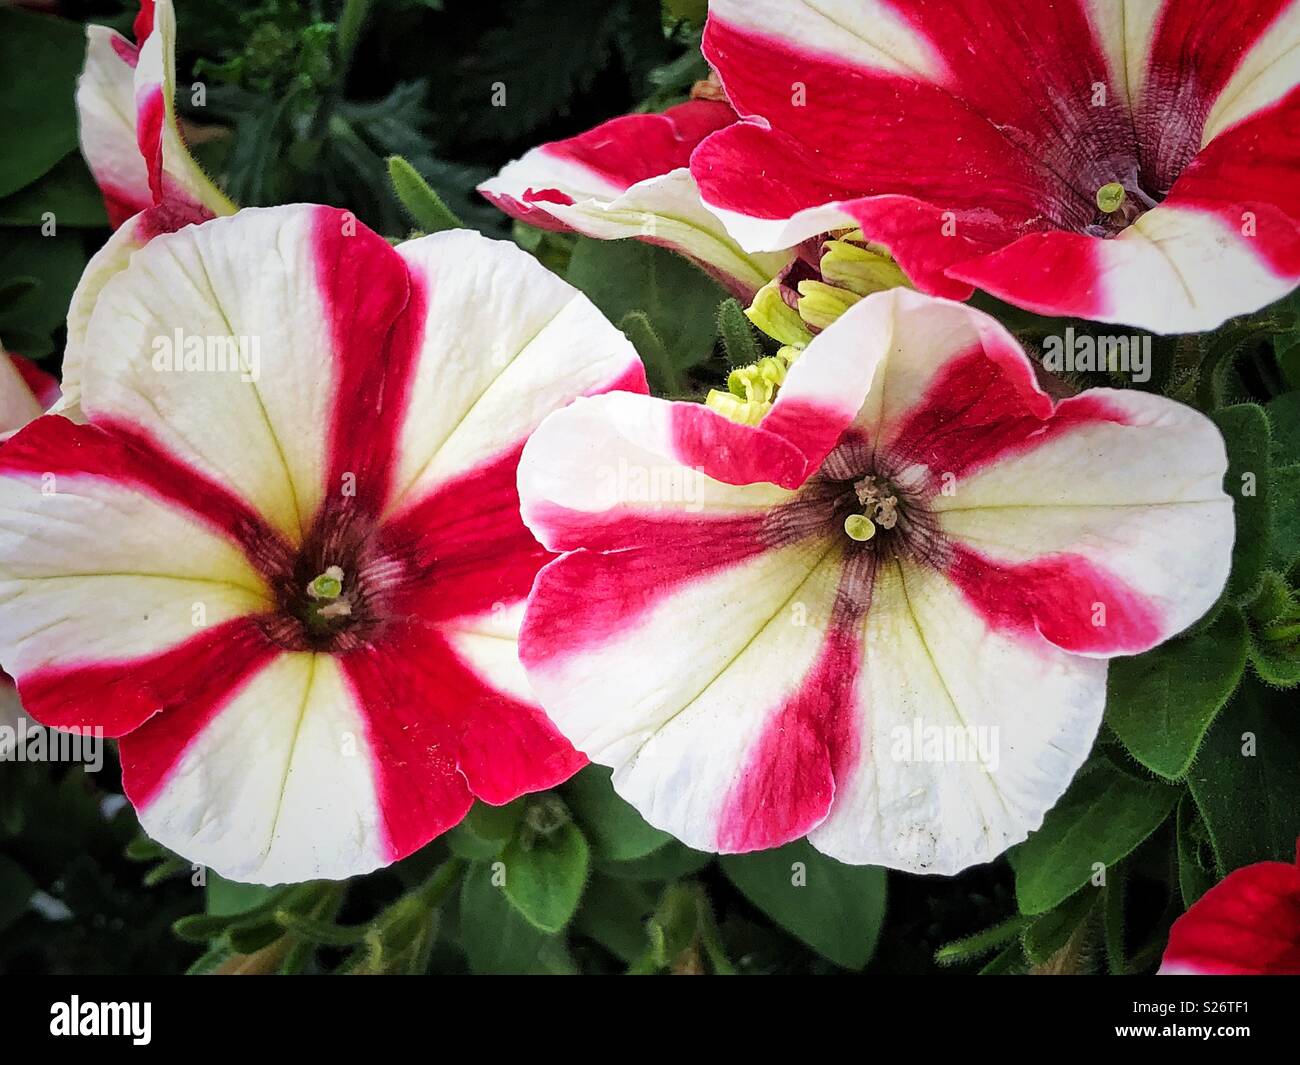 Red and white stripy petunia flowers Stock Photo